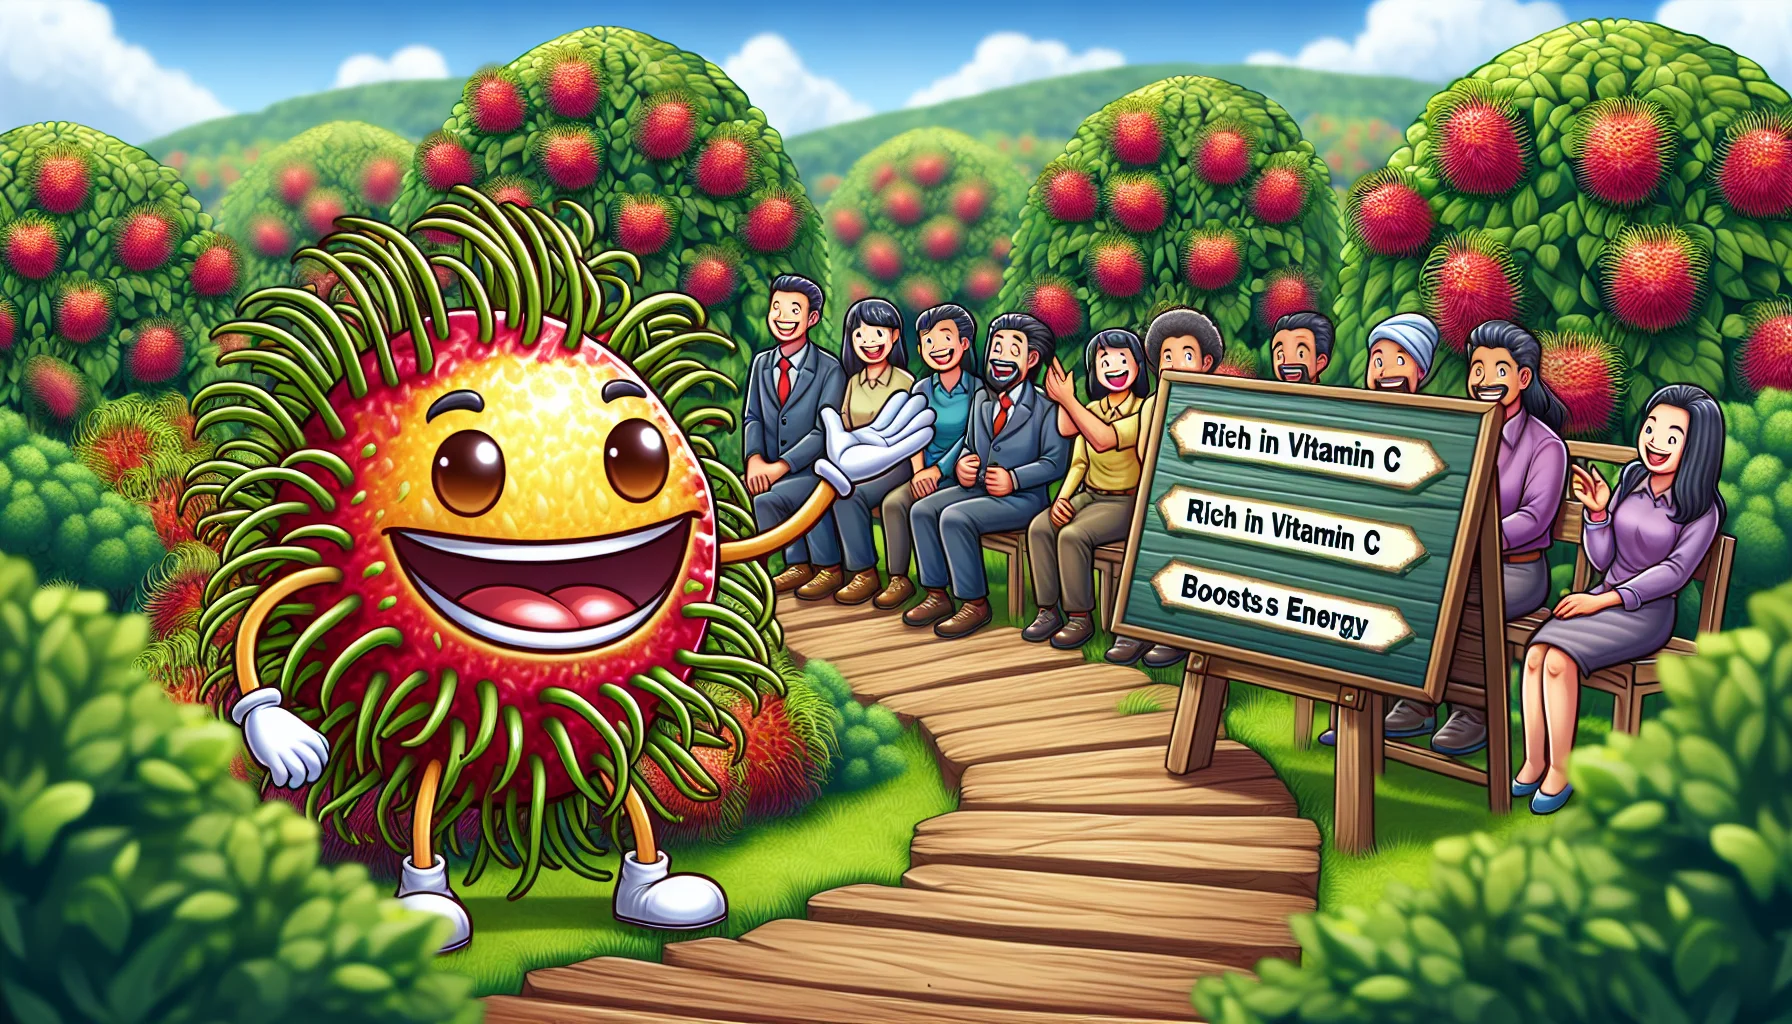 Create a detailed image showcasing a humorous scenario centered around the benefits of the rambutan fruit. In this picture, a smiling rambutan fruit with its signature hairy exterior and juicy interior is acting as a tour guide. It is in a picturesque garden full of vibrant and blooming rambutan trees, demonstrating the joys of gardening to a diverse group of people of different genders and descents, including Caucasian, Black, Hispanic, and South Asian individuals. In the background, signs indicating benefits such as 'Rich in Vitamin C' or 'Boosts Energy' add a fun and educational element to enjoy the magic of gardening.